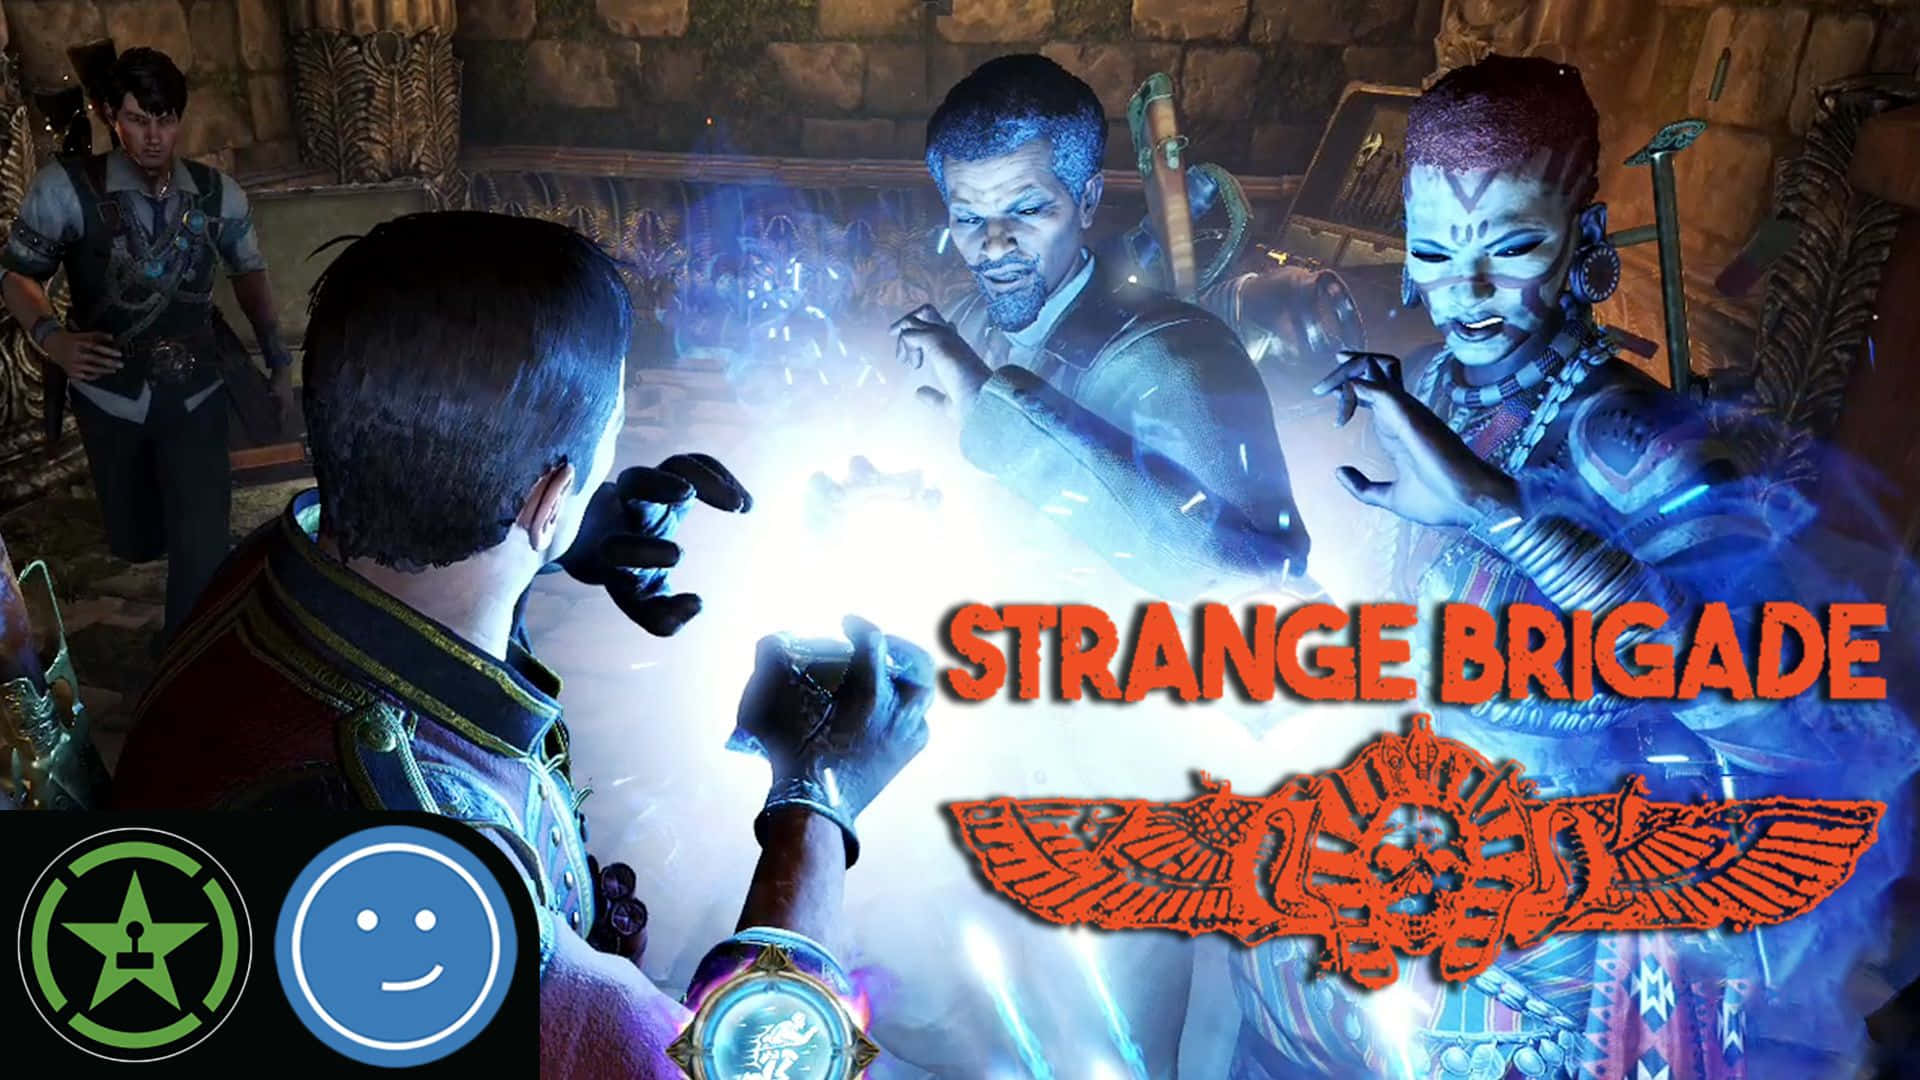 Strange Brigade - A Game With A Mysterious Theme